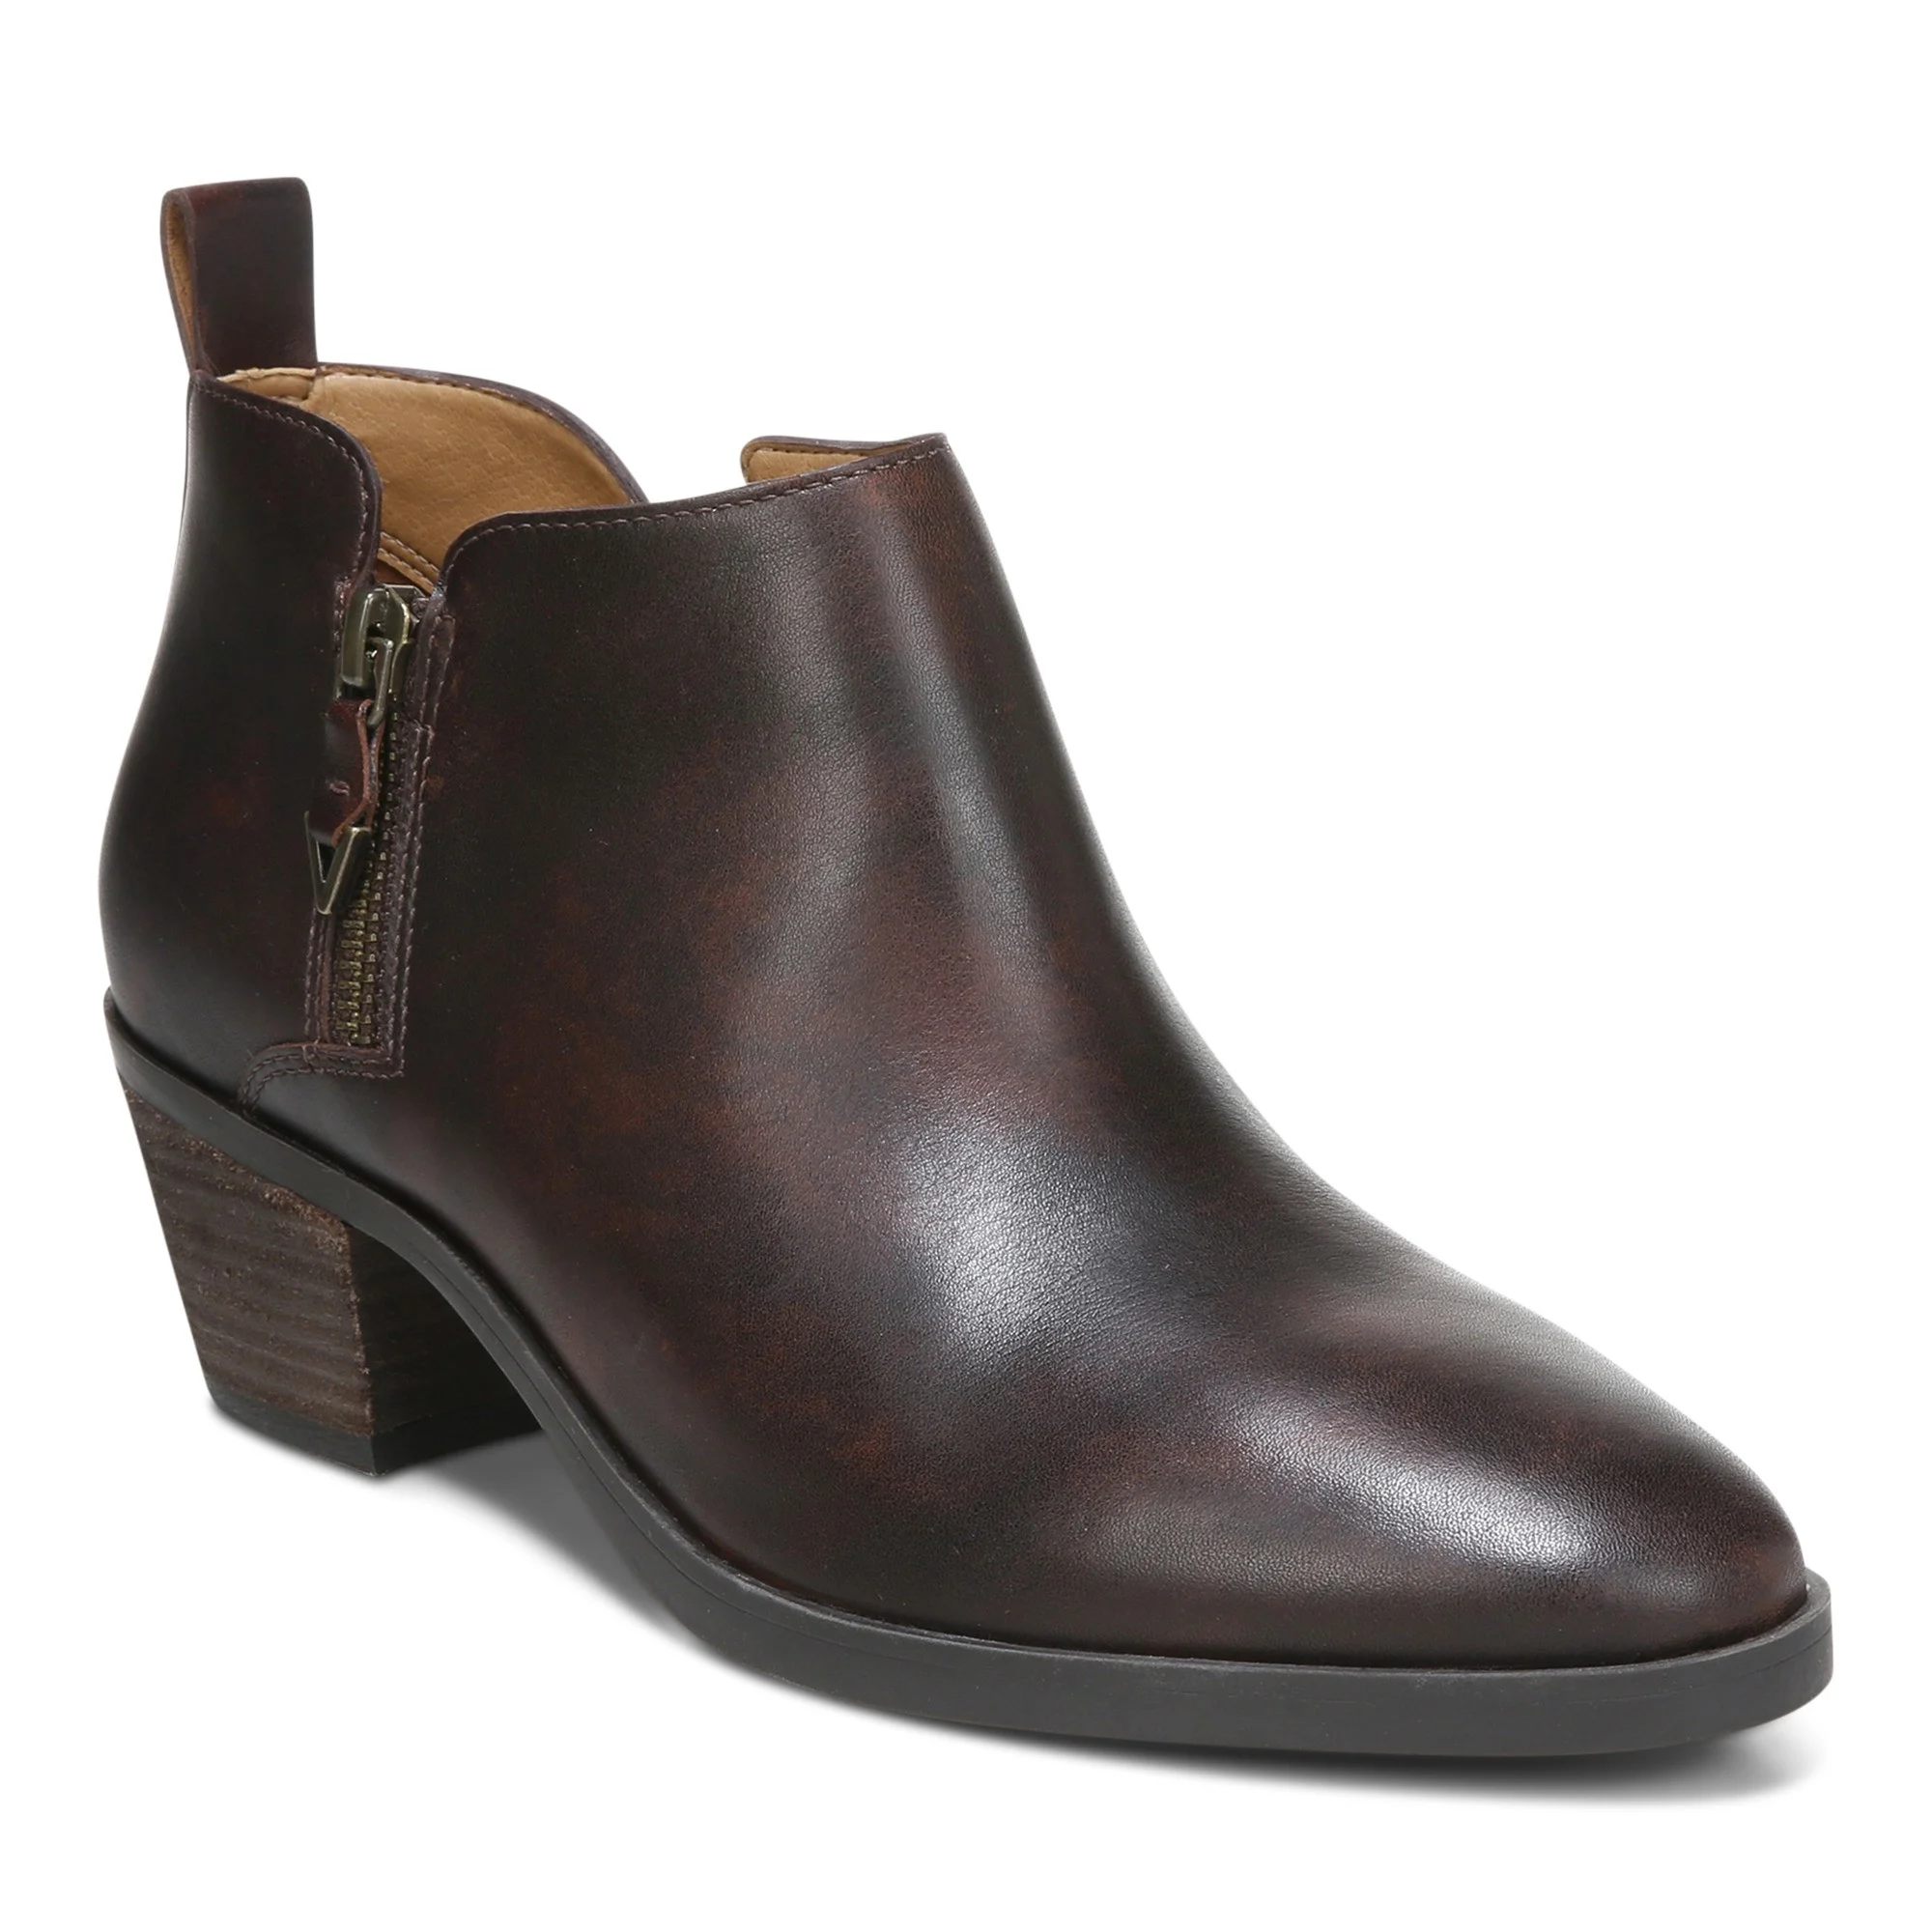 Women's Vionic Cecily Ankle Boot - Chocolate | Stan's Fit For Your Feet